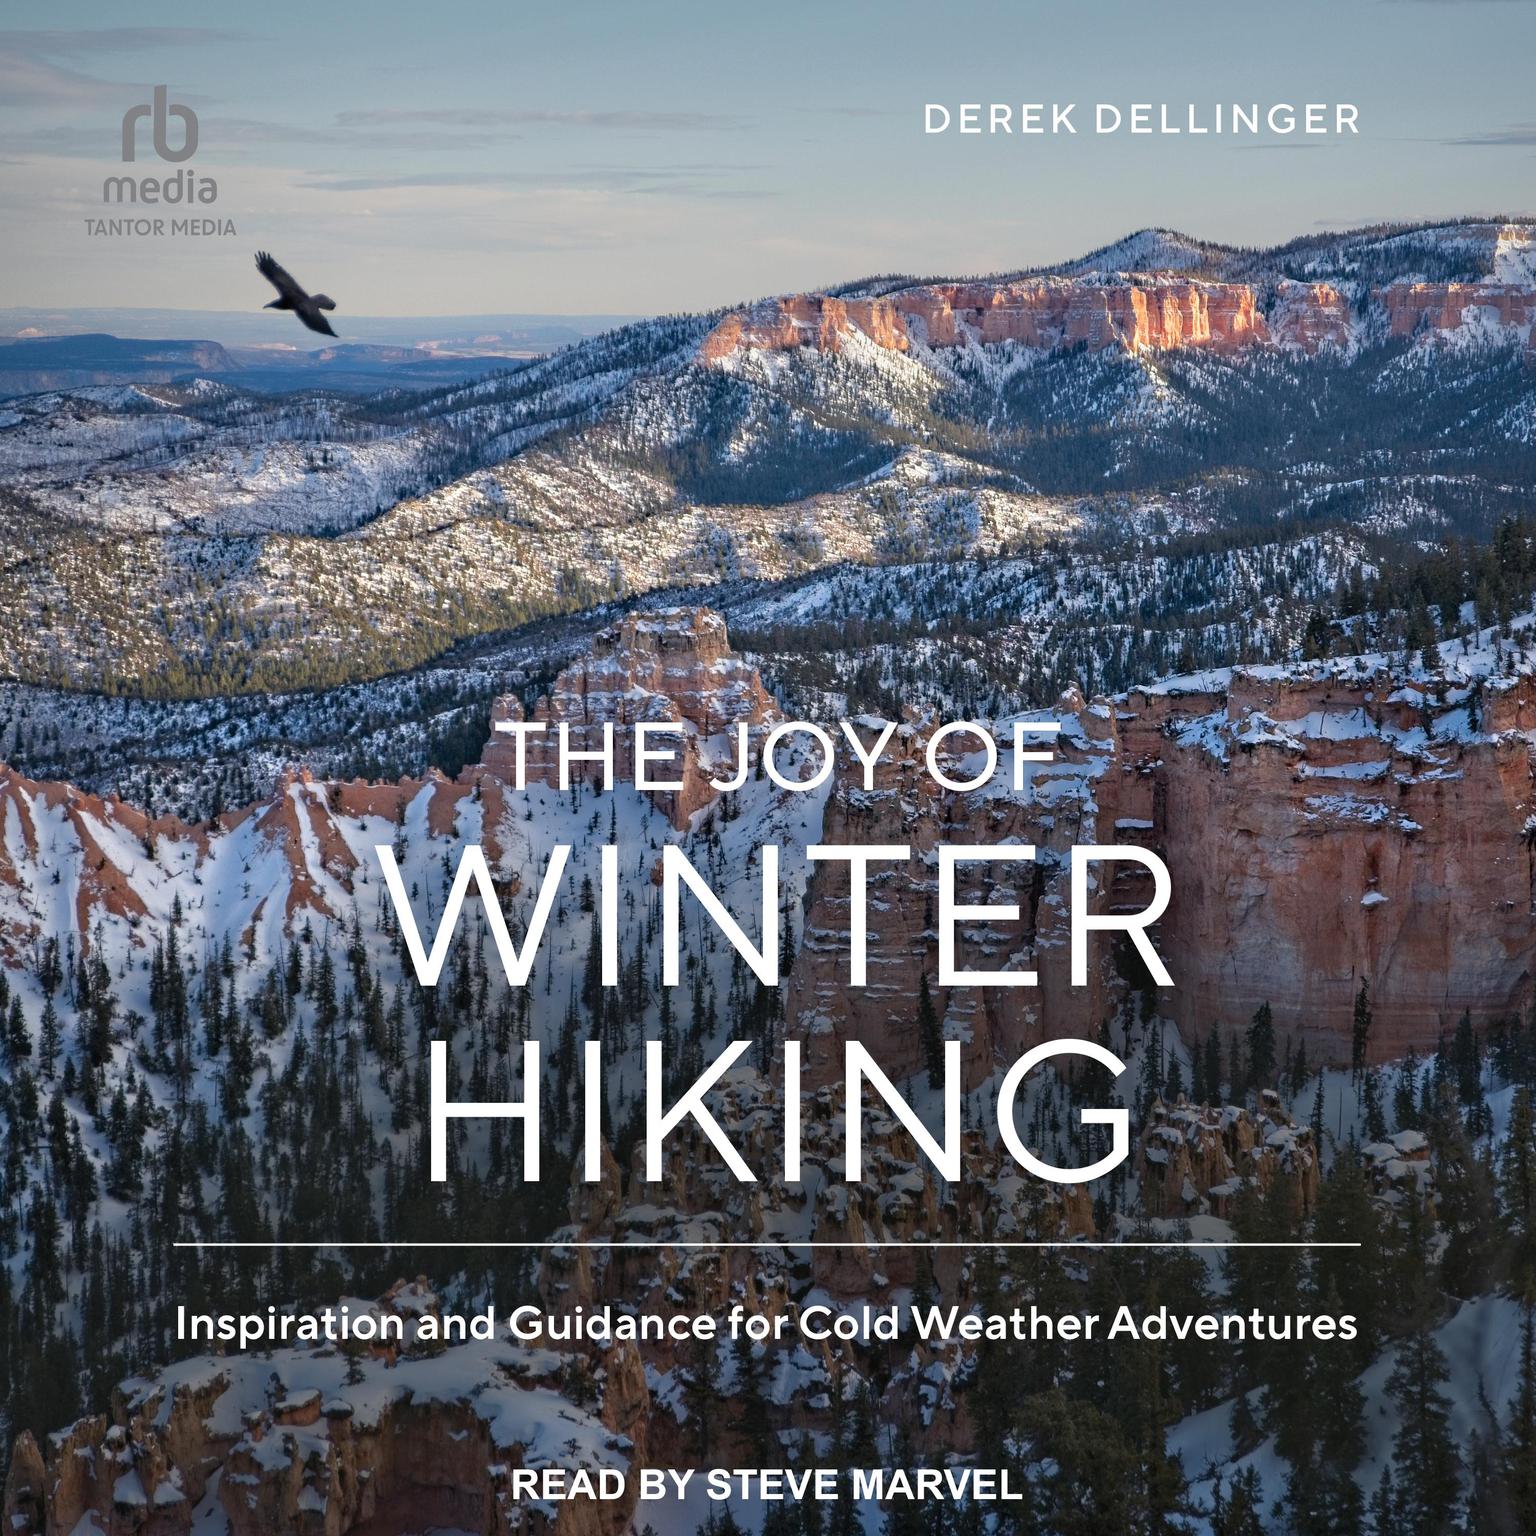 The Joy of Winter Hiking: Inspiration and Guidance for Cold Weather Adventures Audiobook, by Derek Dellinger